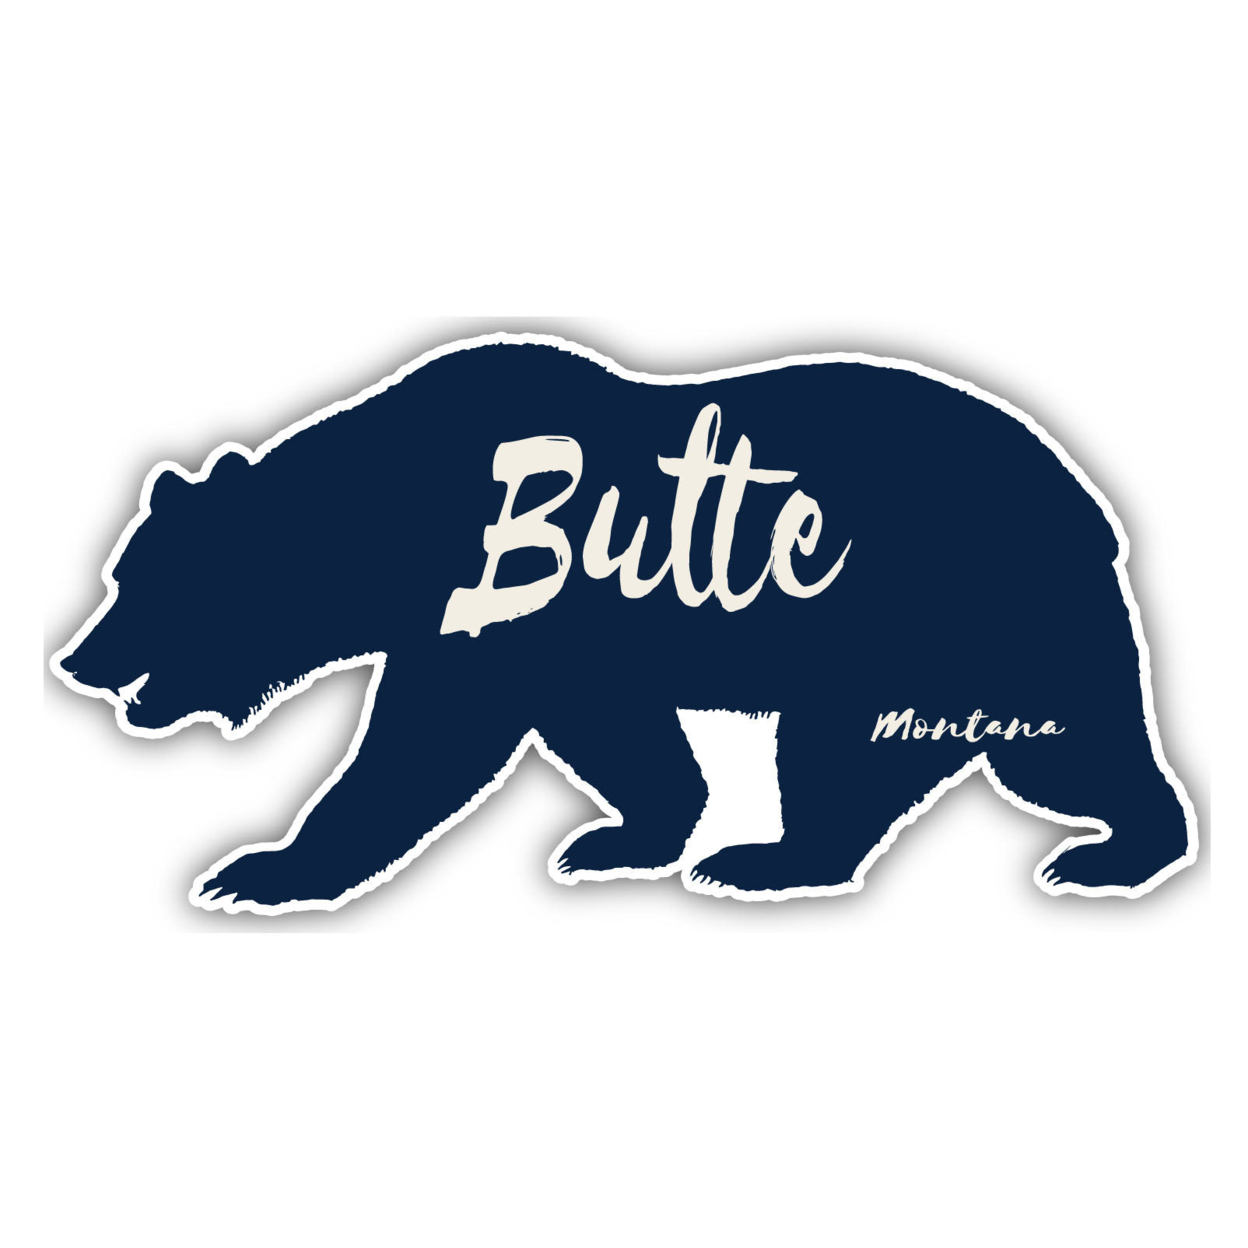 Butte Montana Souvenir Decorative Stickers (Choose Theme And Size) - 4-Pack, 6-Inch, Camp Life